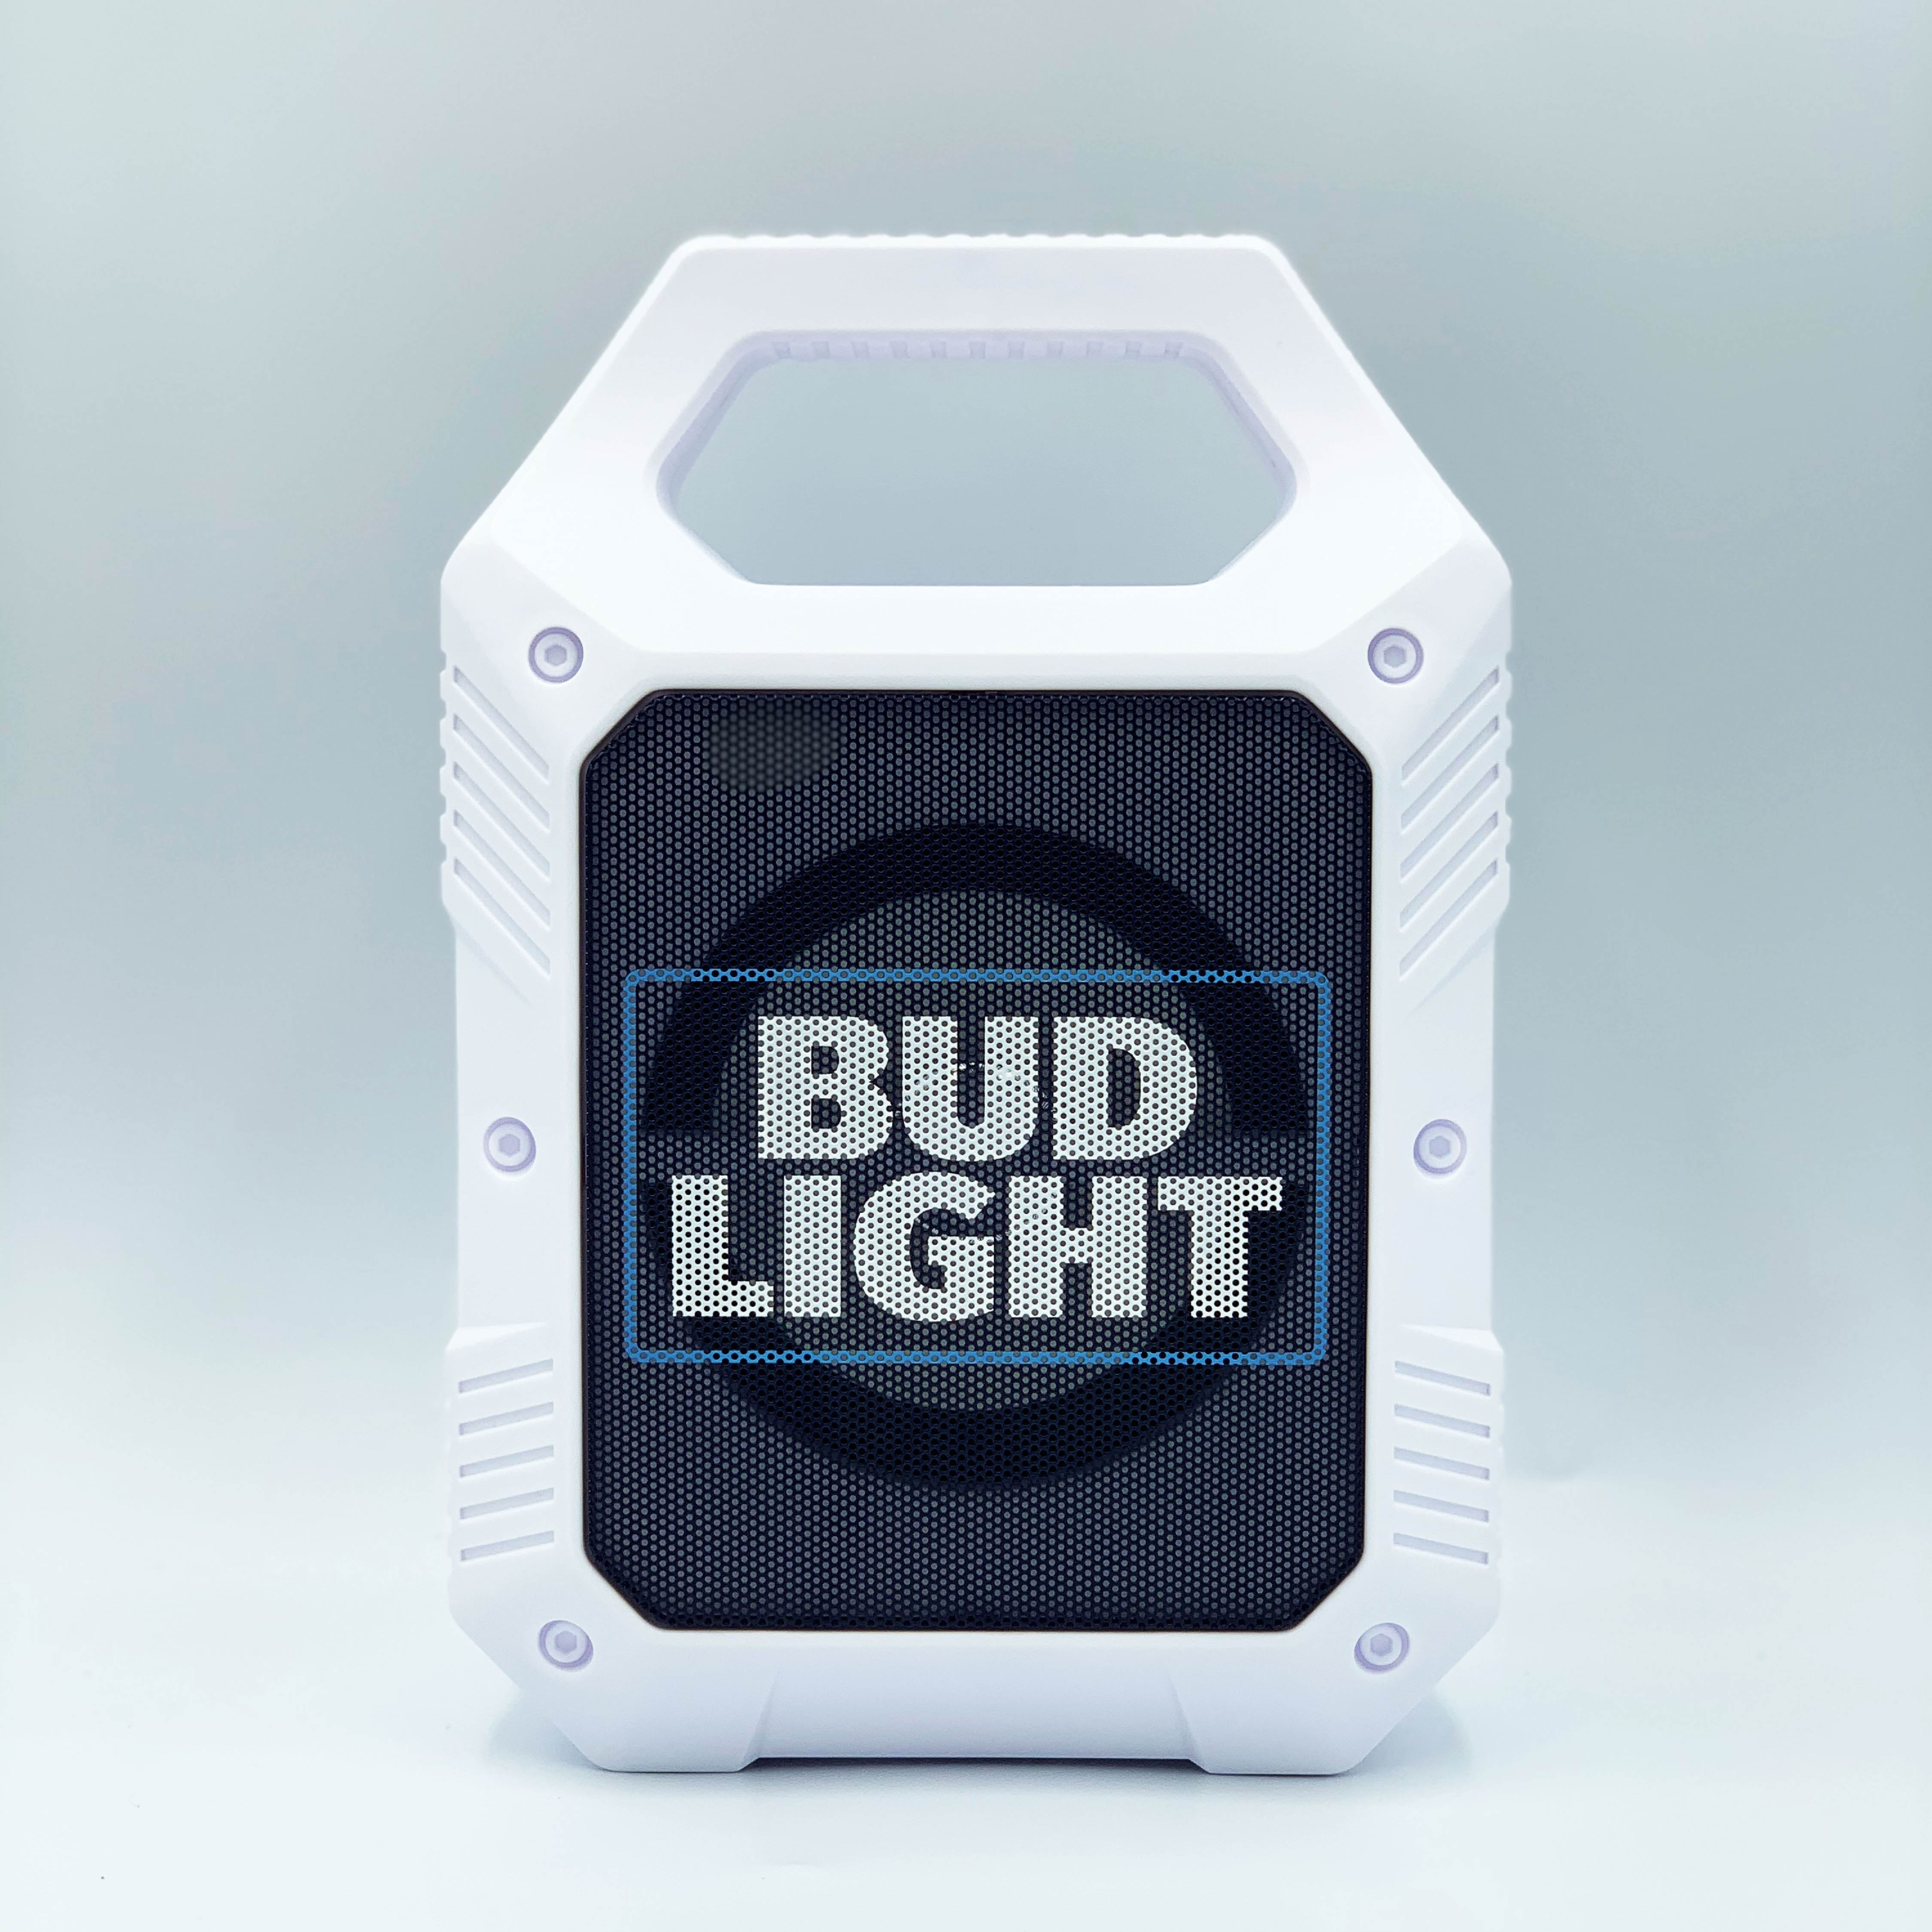 Bud Light controversy cost AB InBev about 395 million in lost US sales   CNN Business